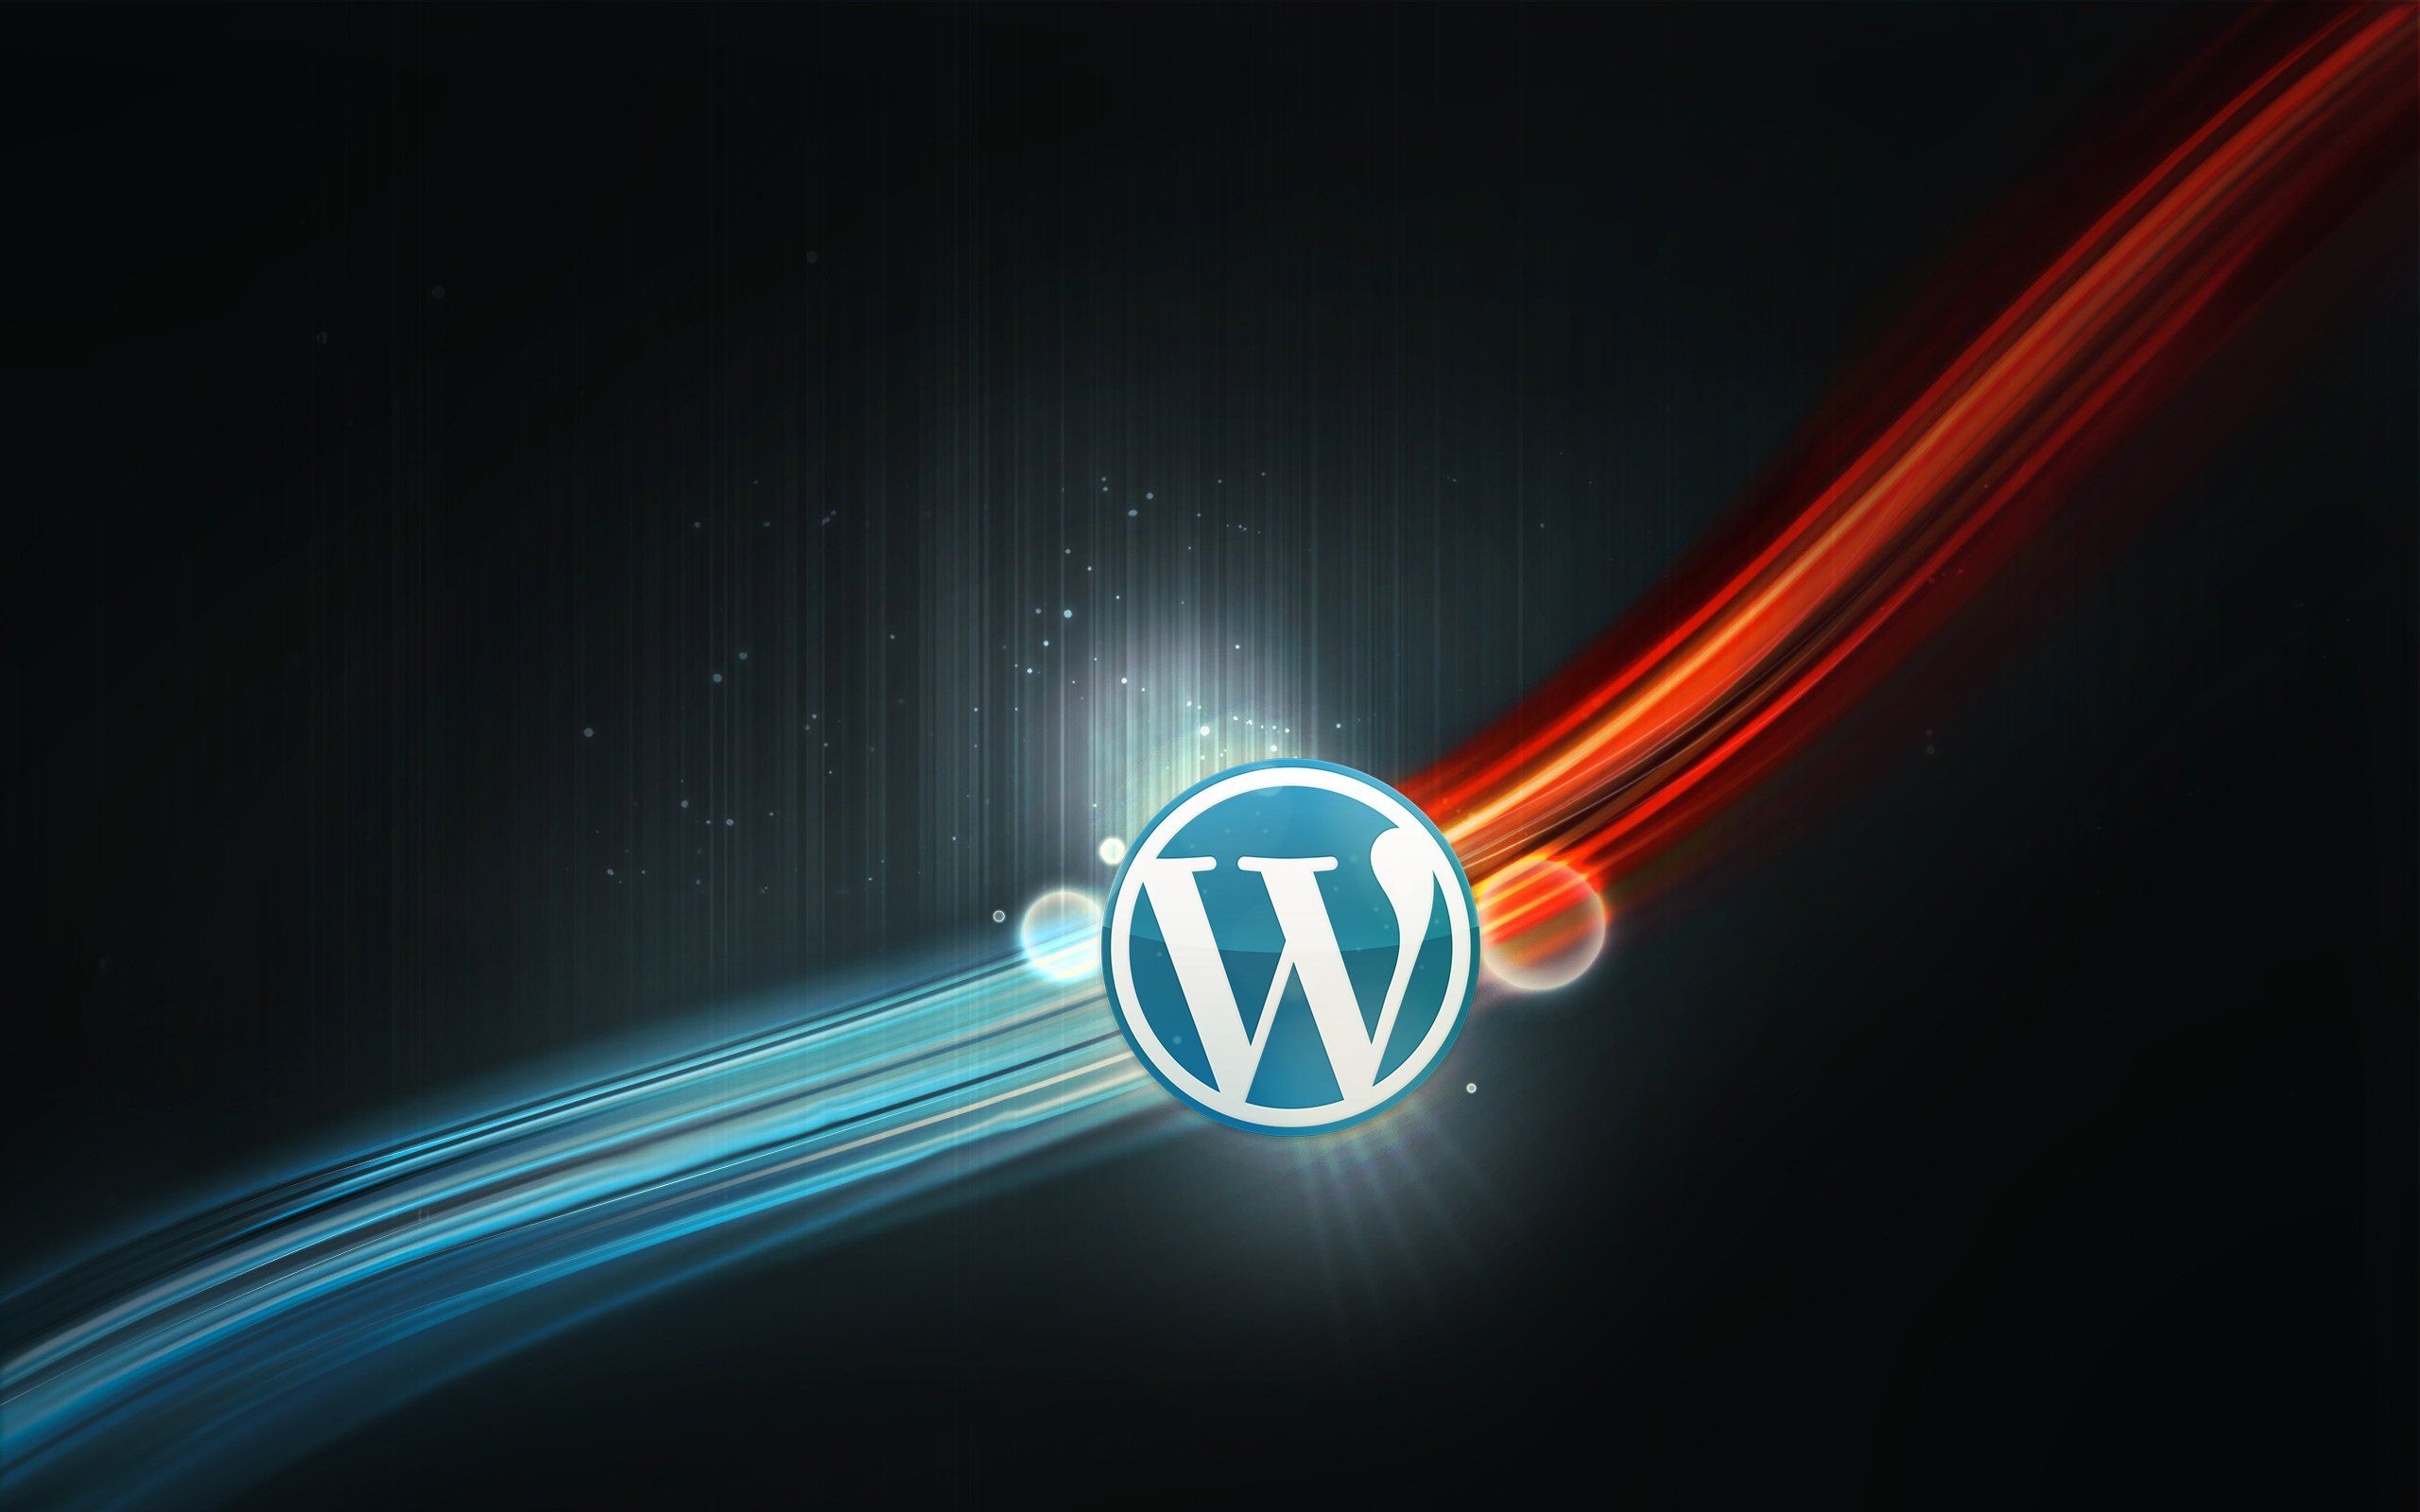 Wordpress 4K wallpaper for your desktop or mobile screen free and easy to download